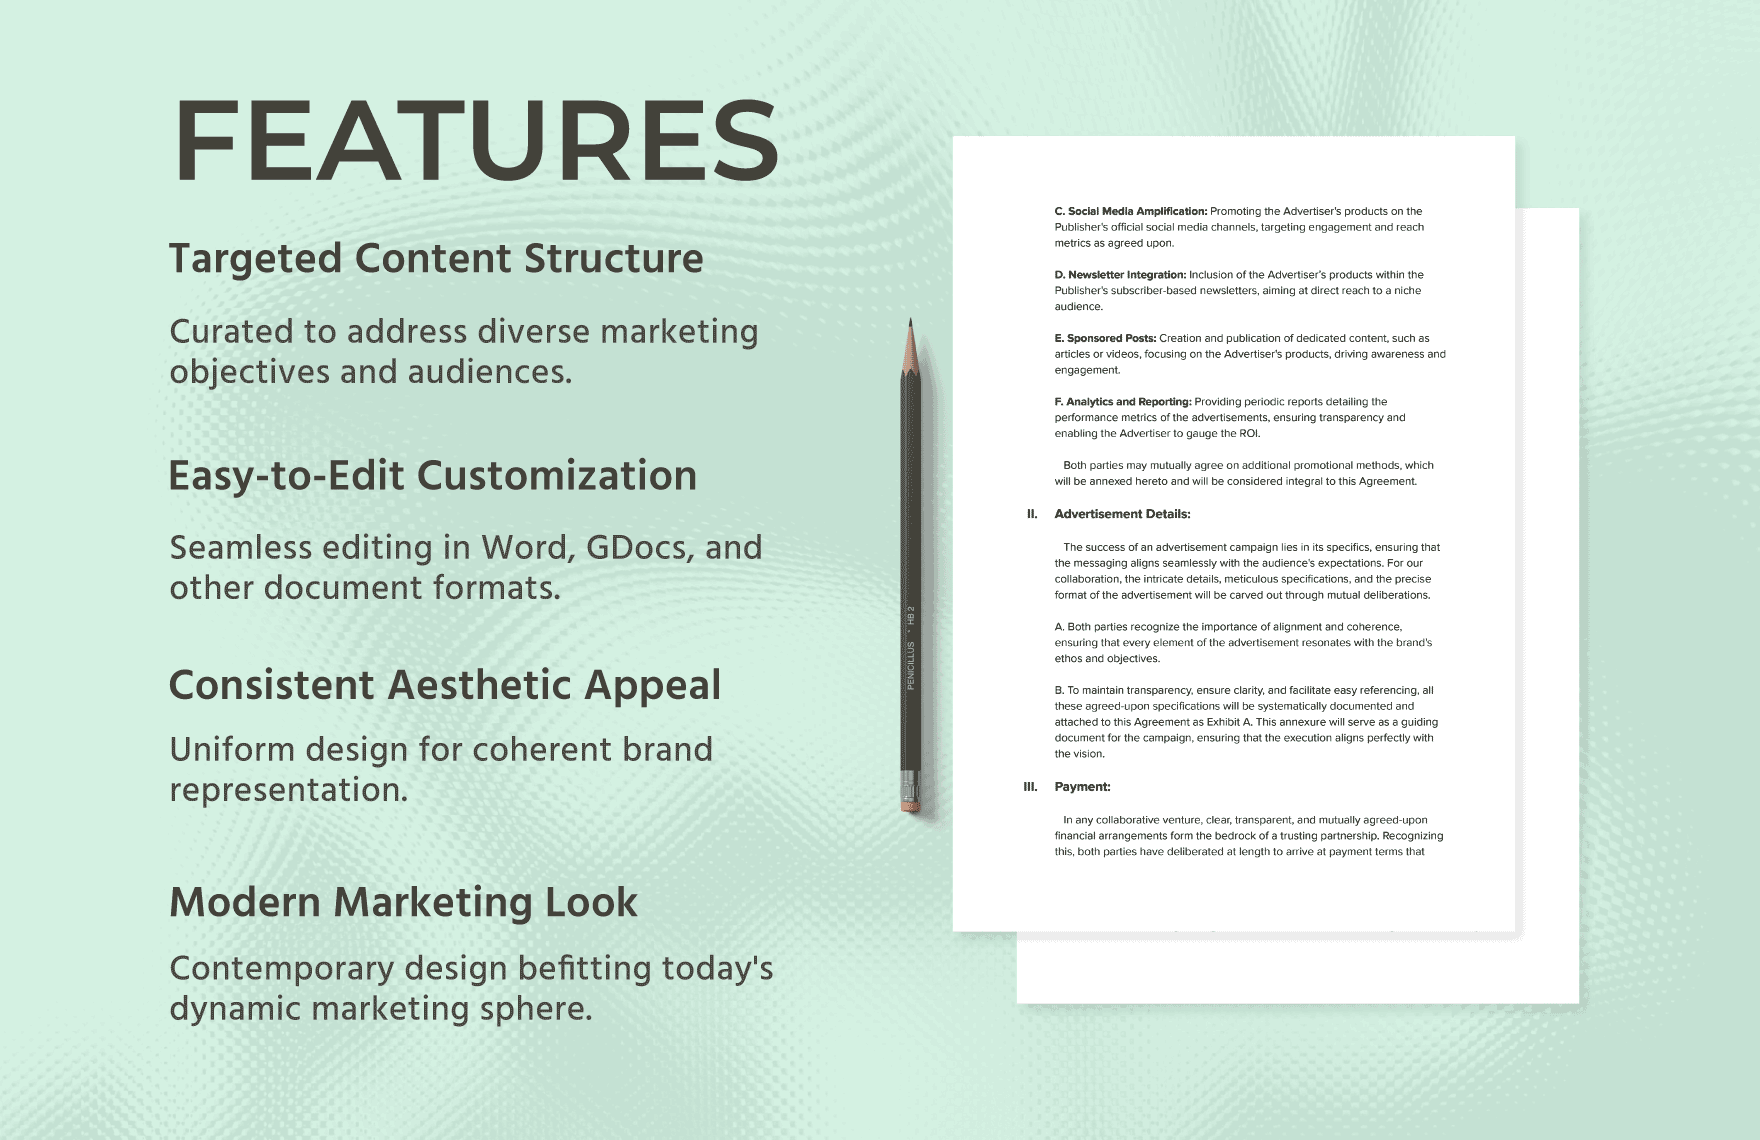 Marketing Product Advertisement Agreement Template